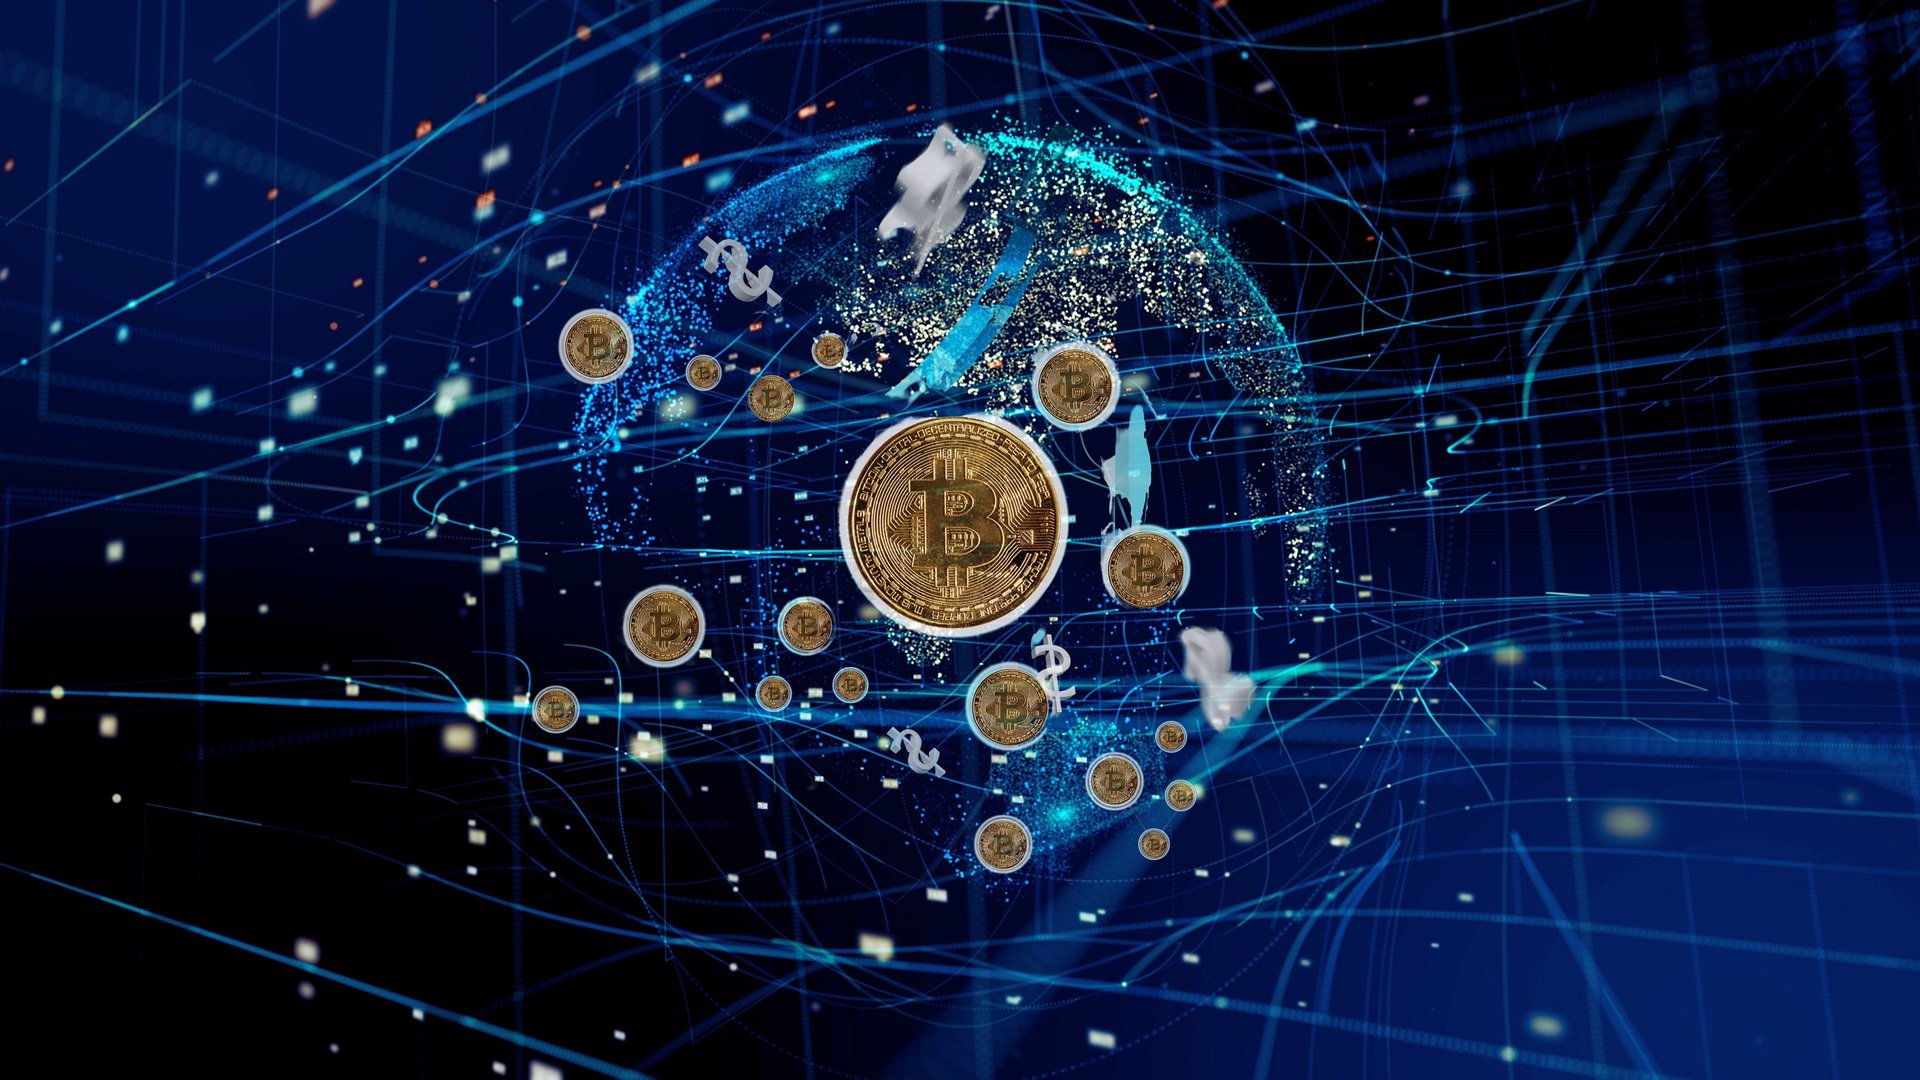 cryptocurrency-2021-g7655f14cd_1920